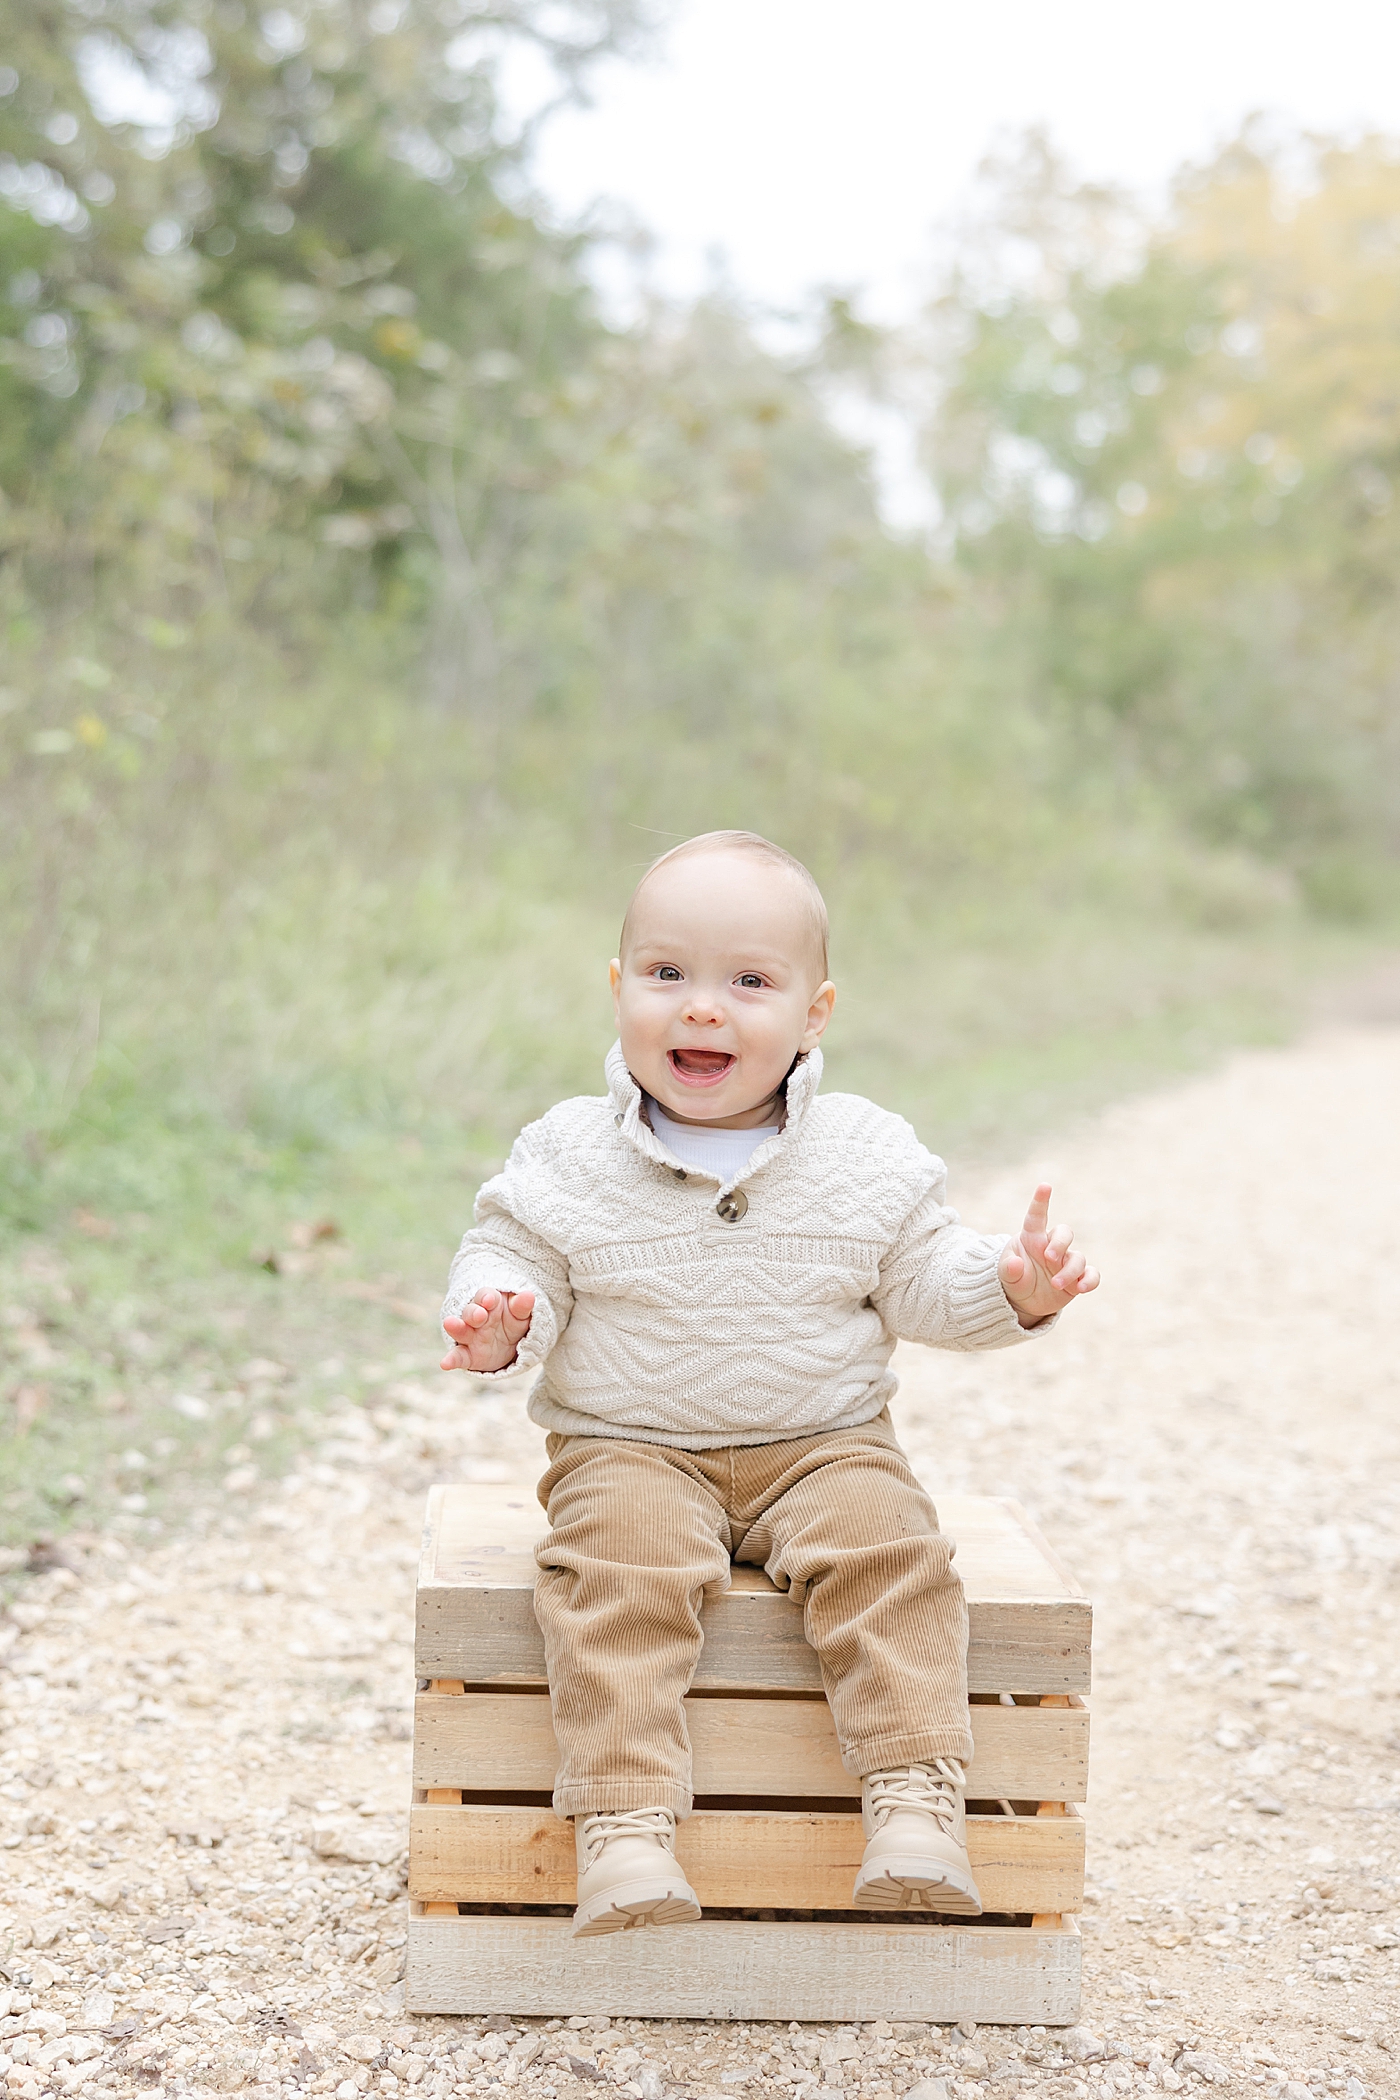 Baby boy sitting on a box | Image by Sana Ahmed Photography